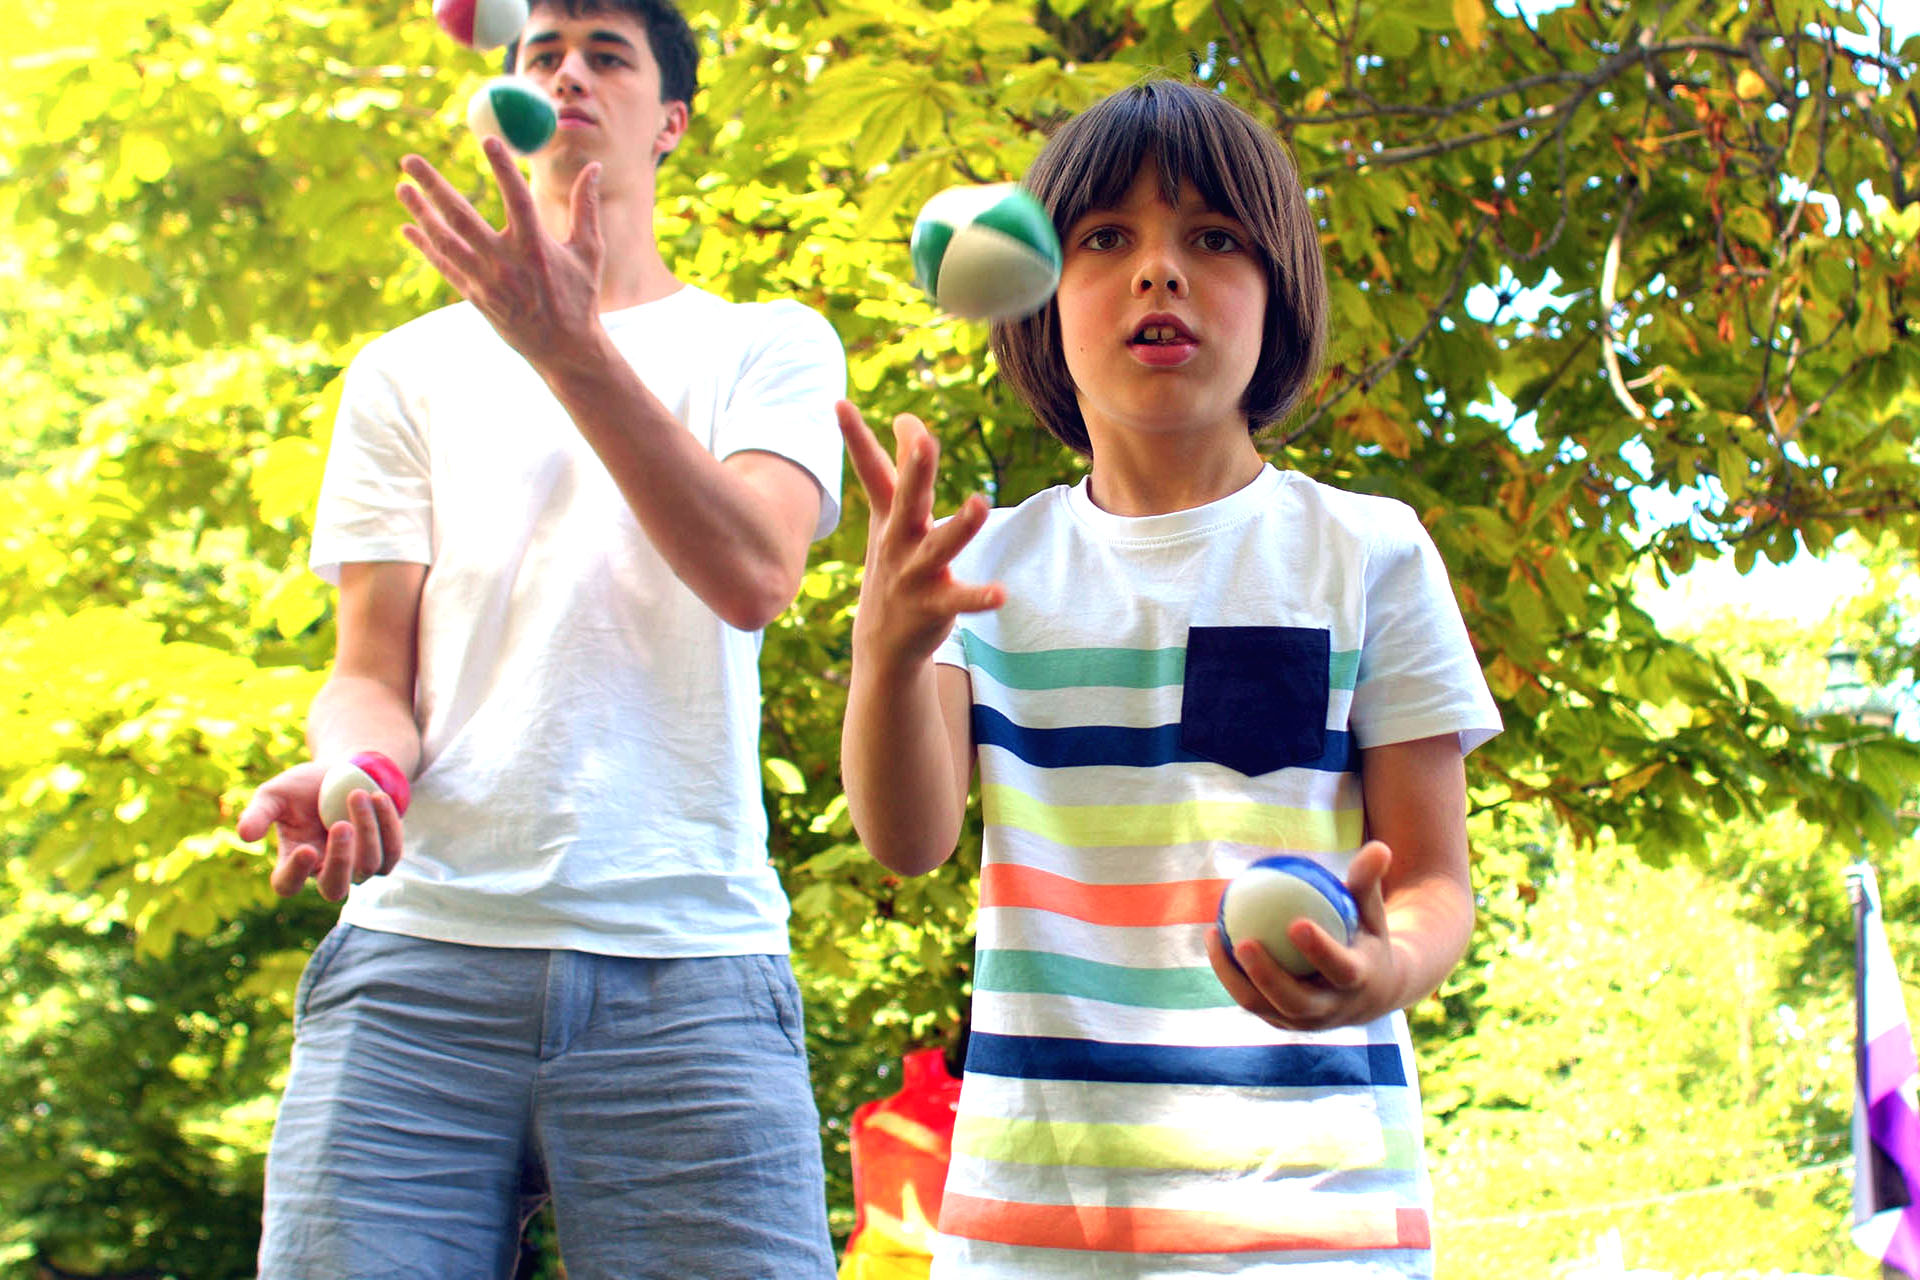 Boy and young teacher with balls. Learning to juggle accelerates the growth of neural connections related to memory, focus, movement, and vision.